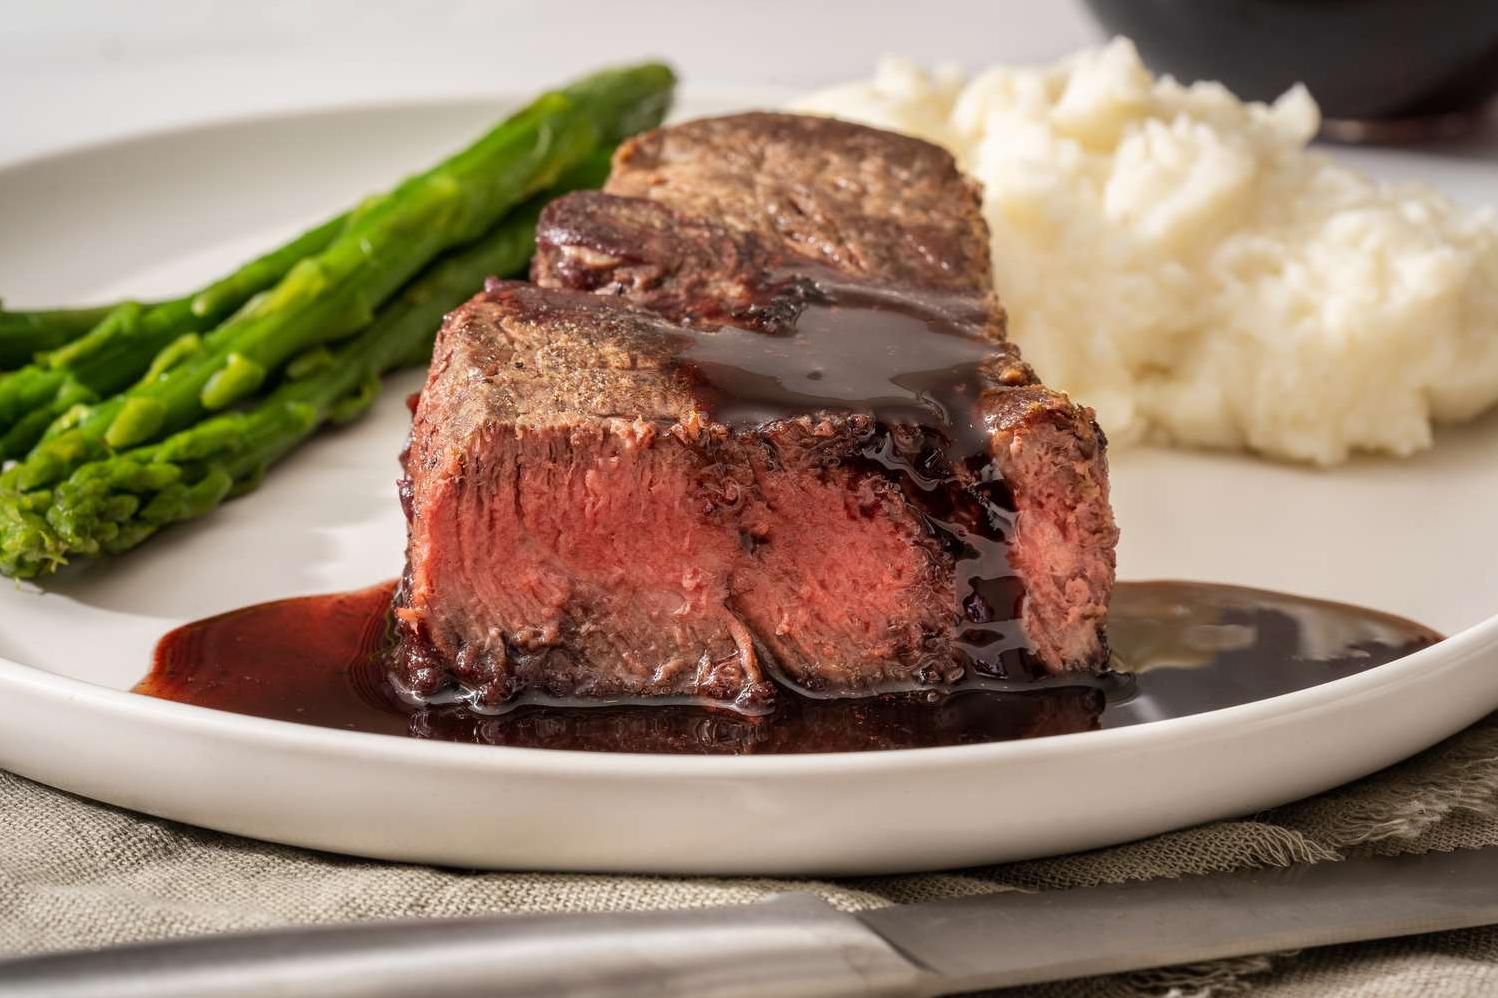  The perfect way to enjoy a juicy steak with a rich, flavorful sauce